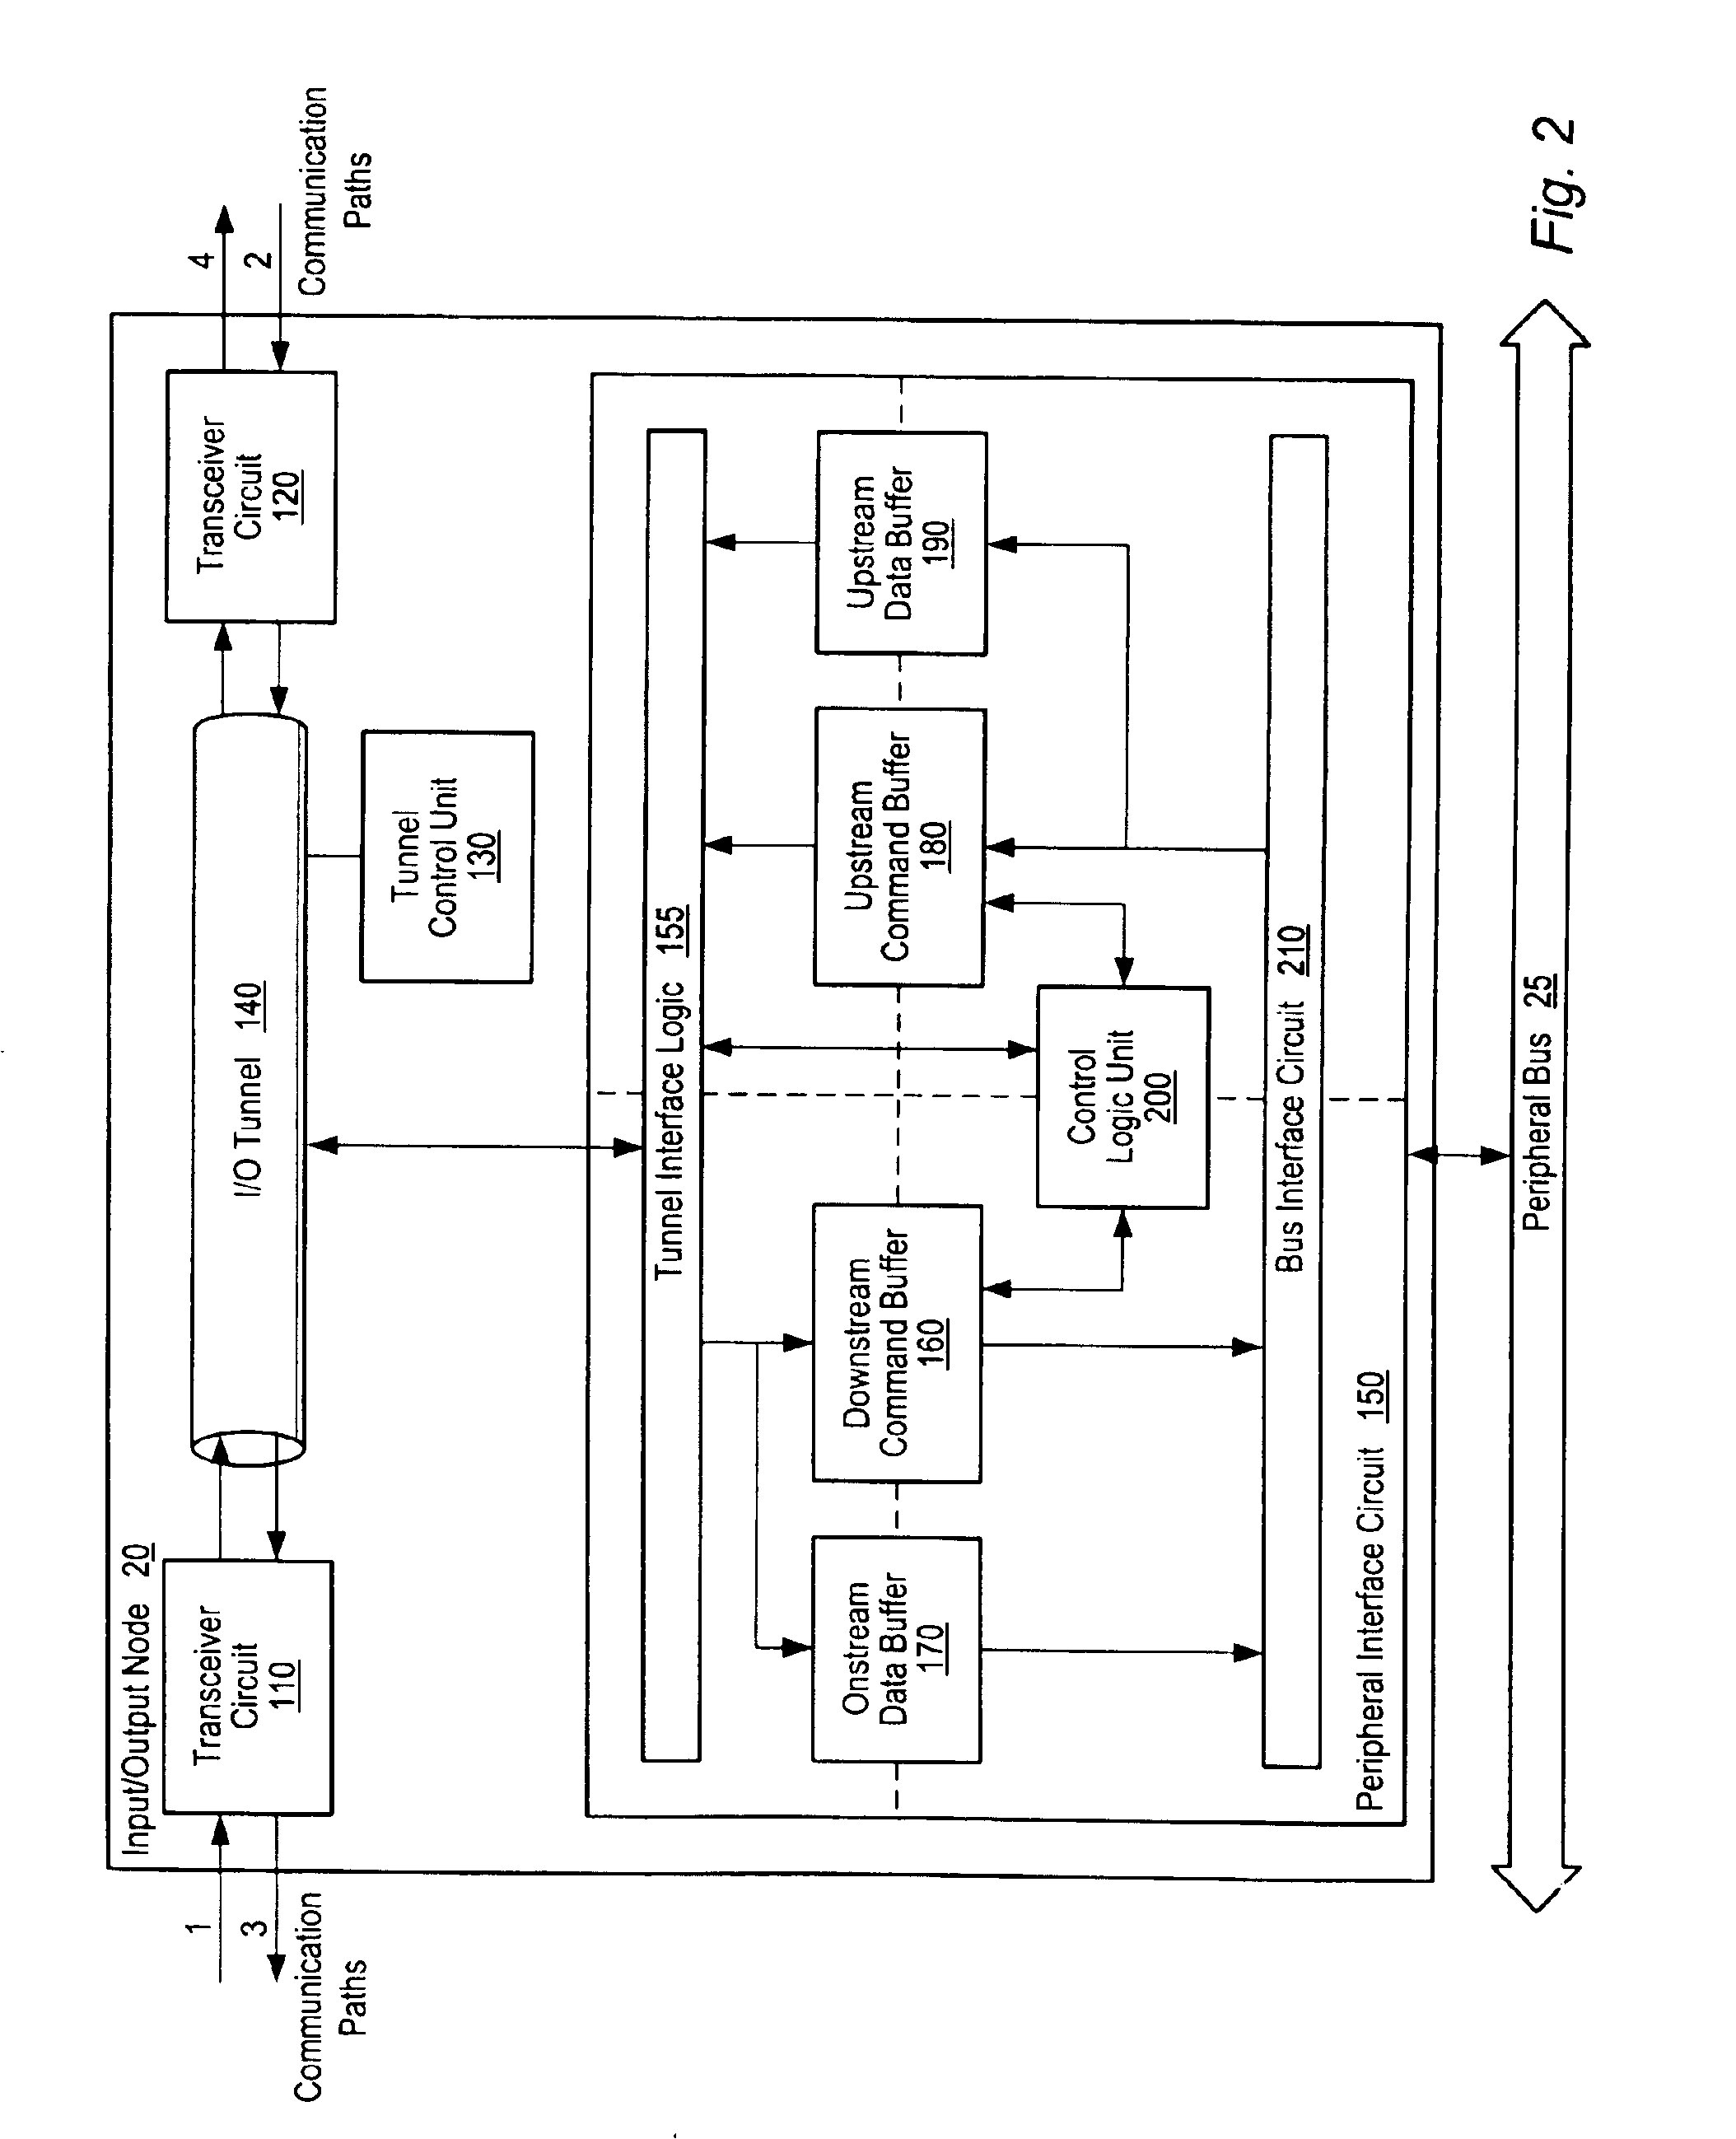 System and method for analyzing bus transactions